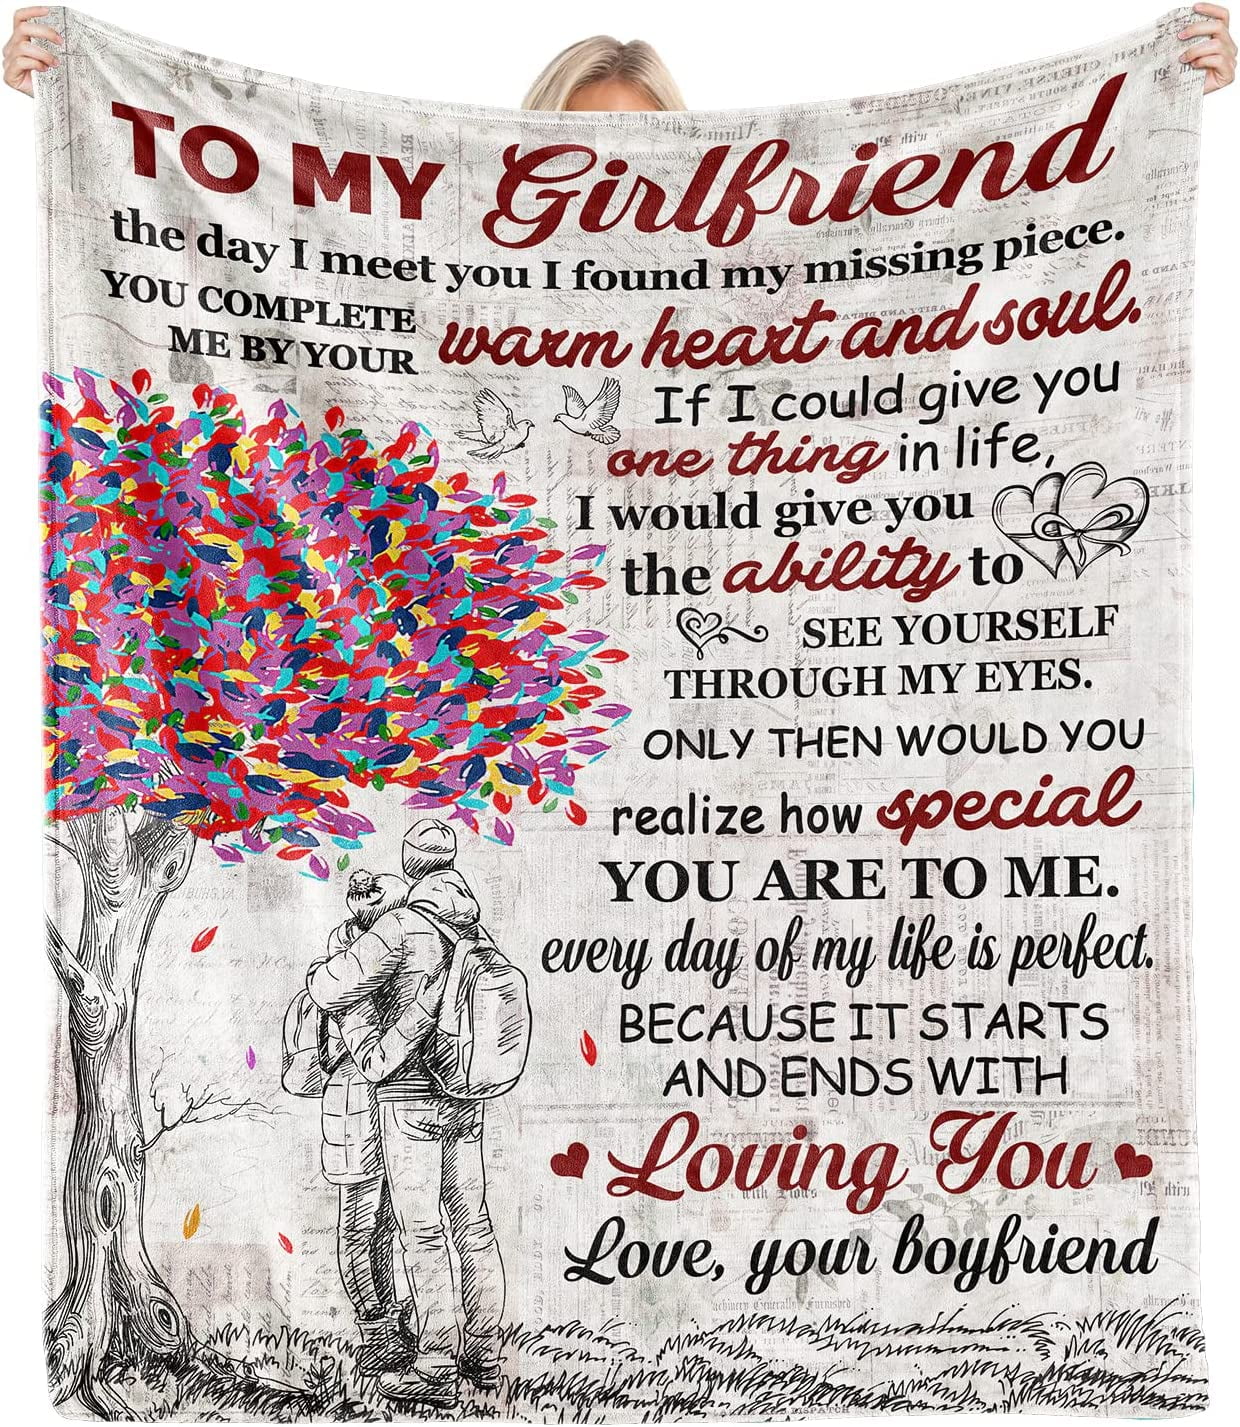 Wisegem Gifts for Girlfriend 60x50 Blanket - Birthday Gift from Boyfriend  - Romantic Gifts for Her - Valentine's Day for Her - Girlfriend